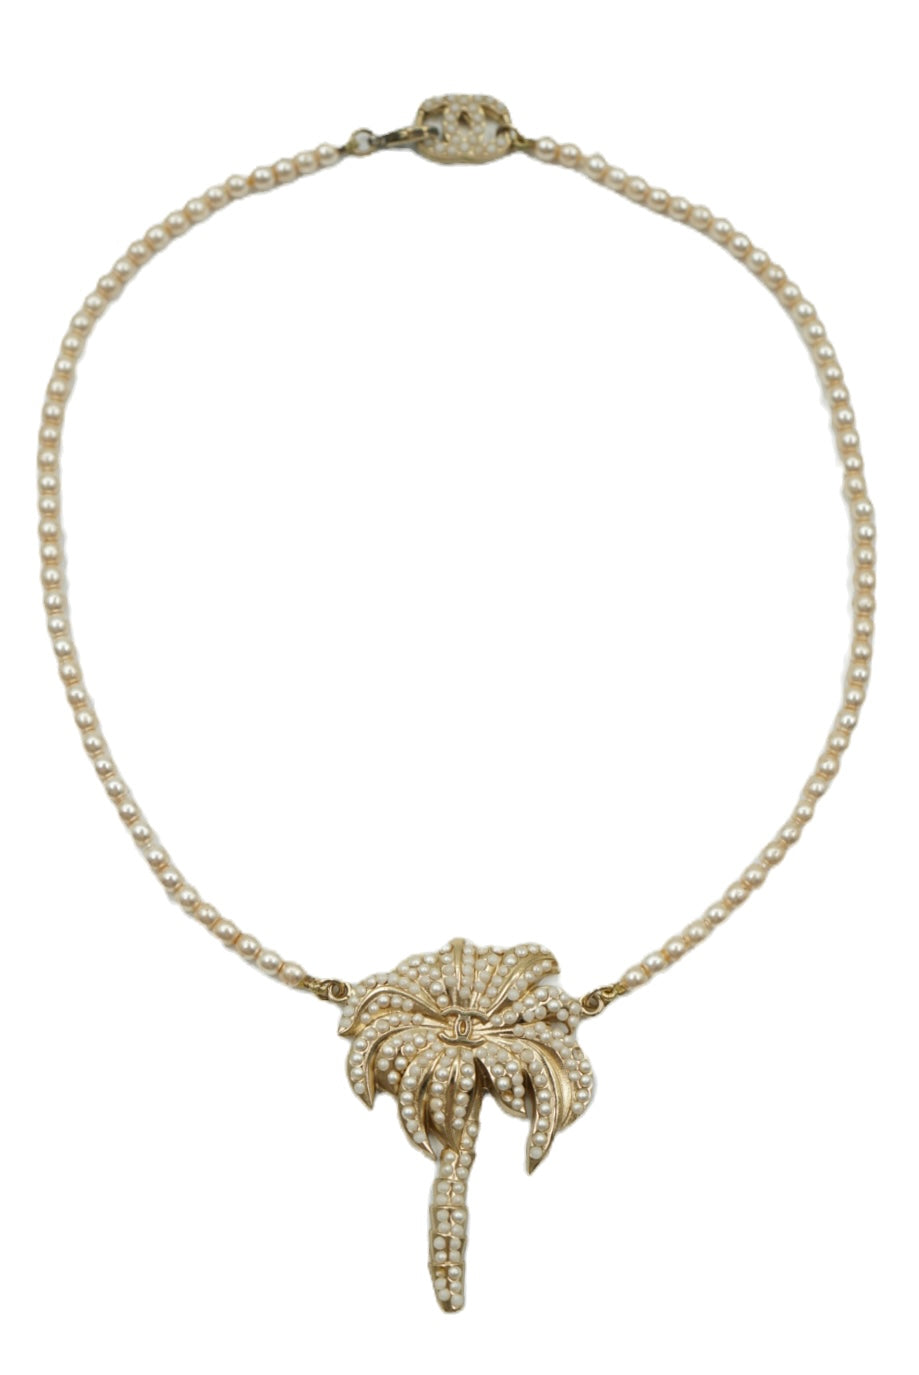 Chanel palm tree pearl necklace